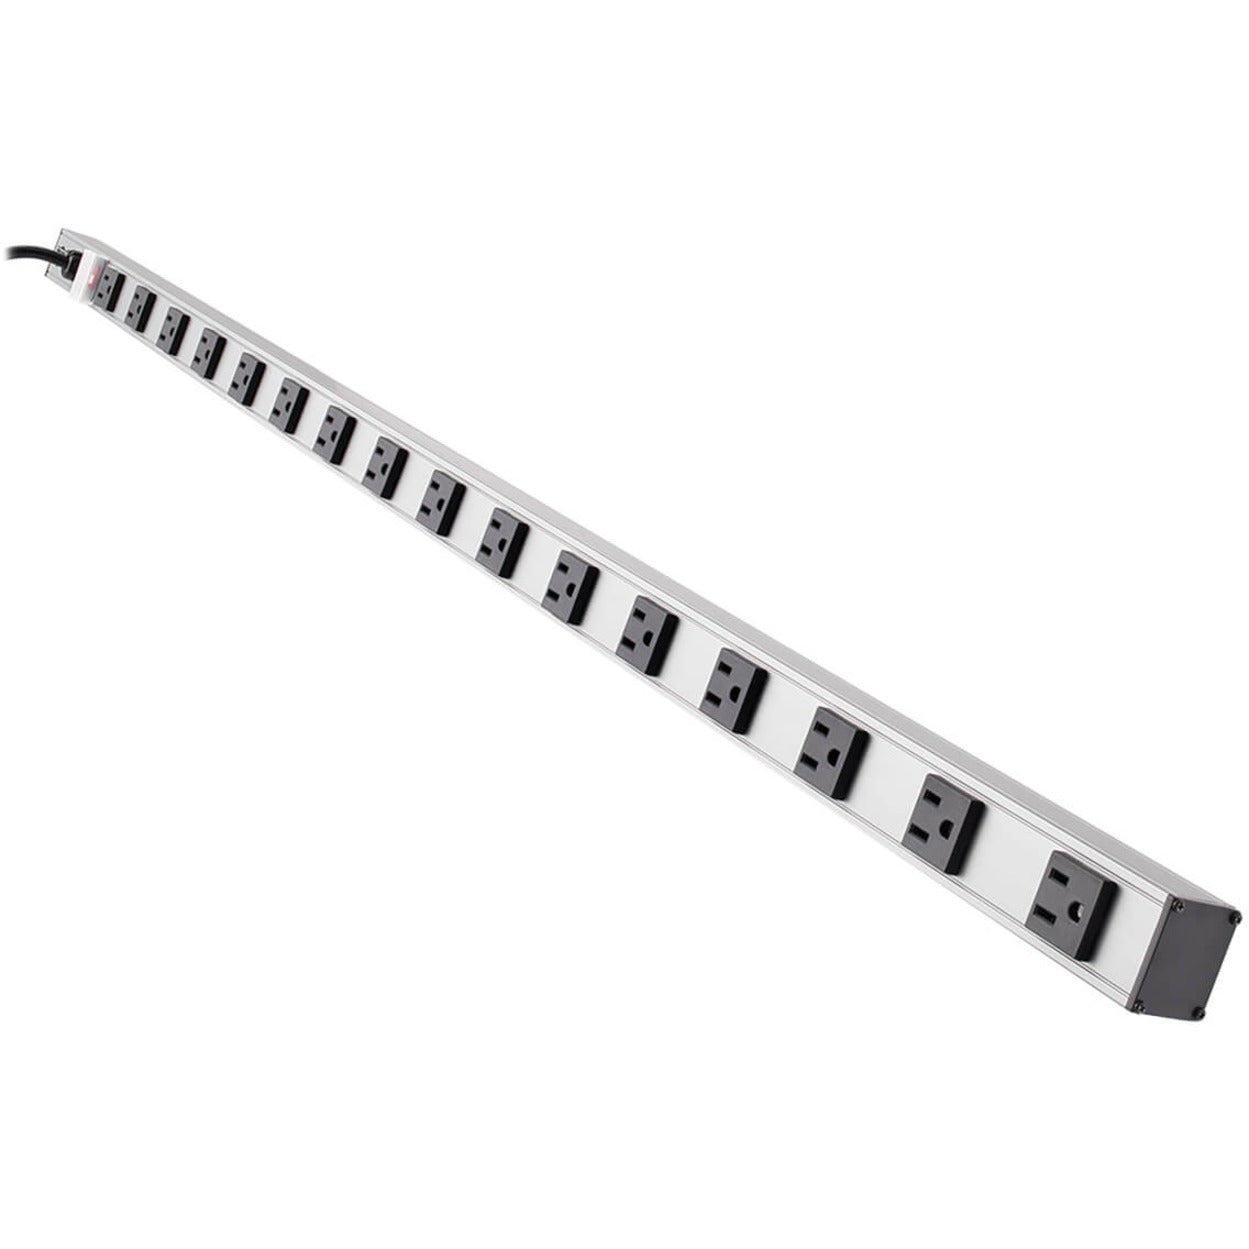 Tripp Lite PS4816 POWERSTRIP 16-Outlet Strip, 15ft Cord, 48in Length, Switch, Metal